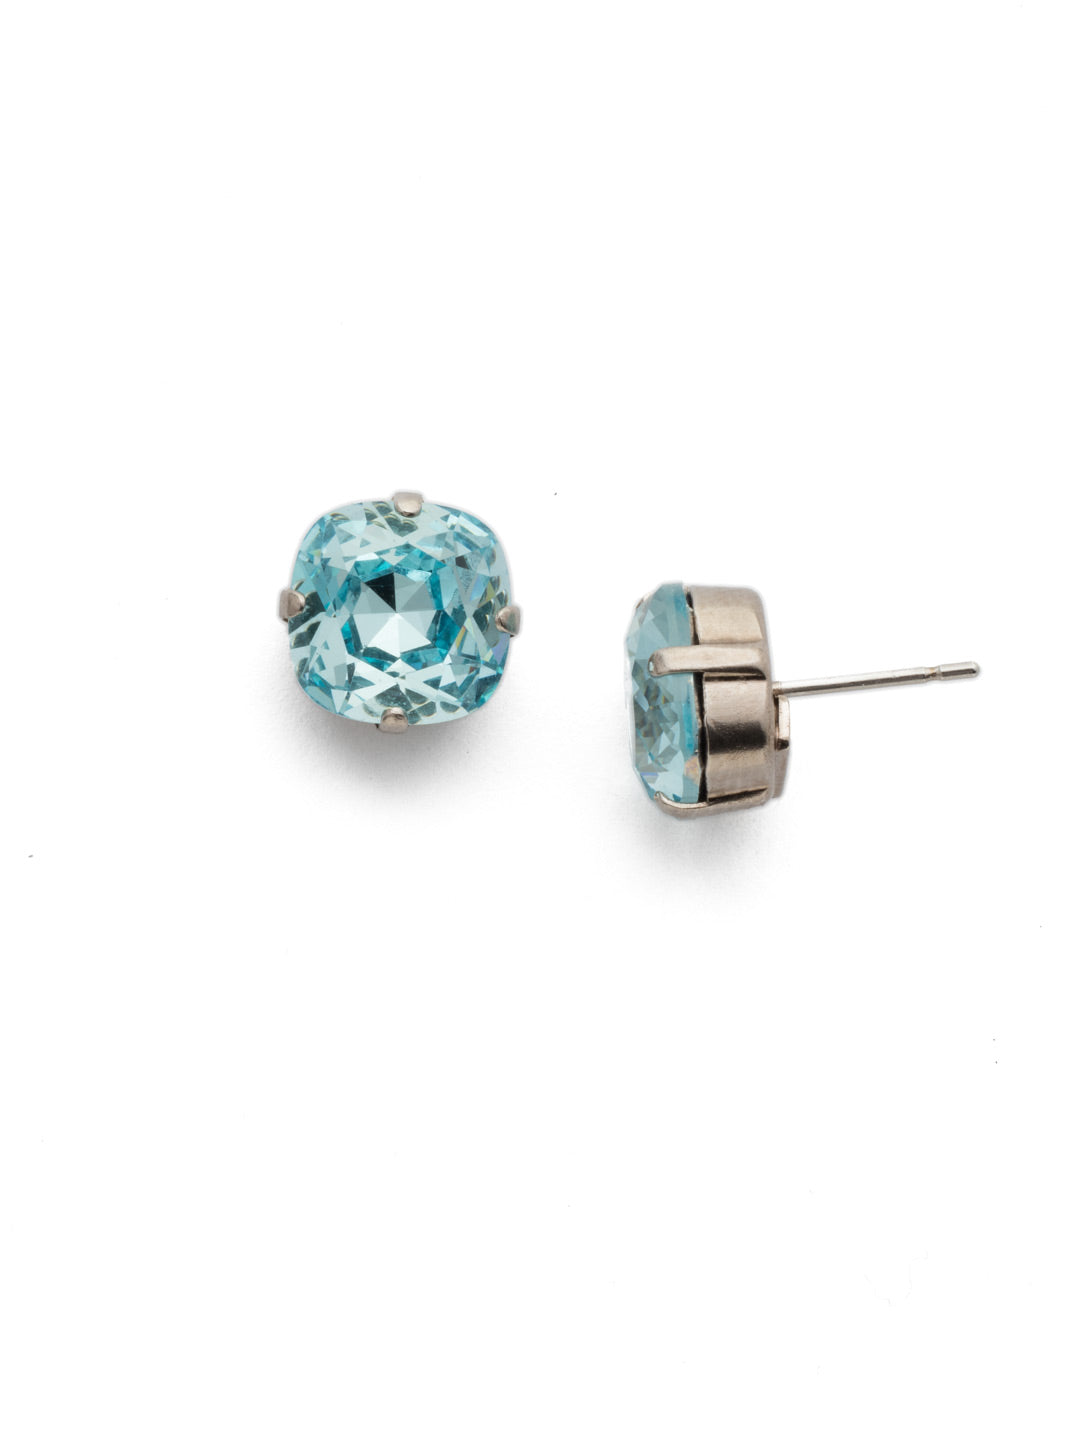 Halcyon Stud Earrings - EDH25ASAQU - <p>A beautiful, luminous cushion-cut crystal in a classic four-pronged setting that's ideal for everyday wear. From Sorrelli's Aquamarine collection in our Antique Silver-tone finish.</p>